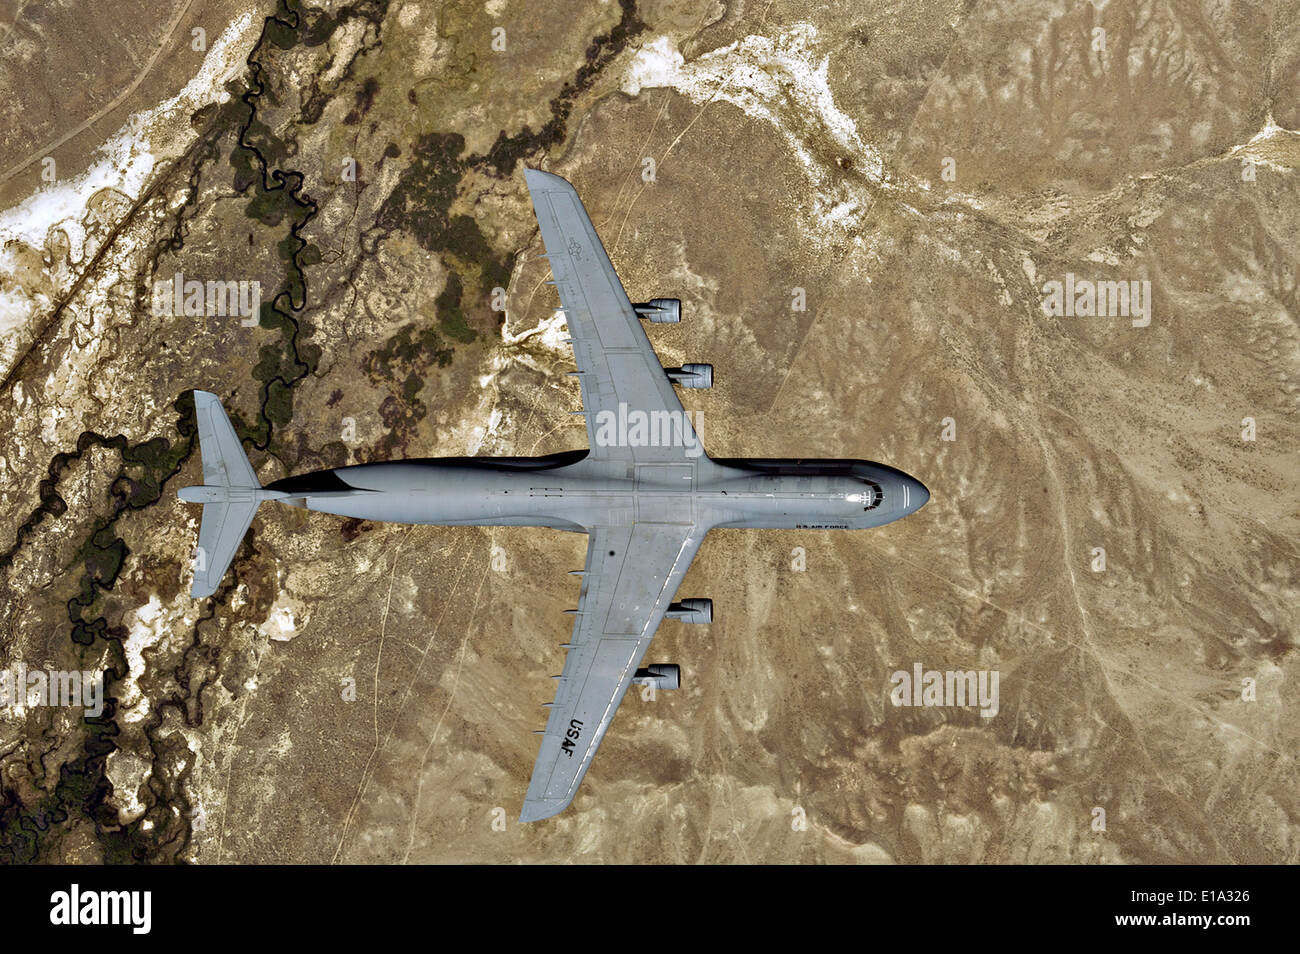 A US Air Force C-5 Galaxy transportation aircraft from the Utah Air National Guard during training operations June 11, 2012 over California Stock Photo